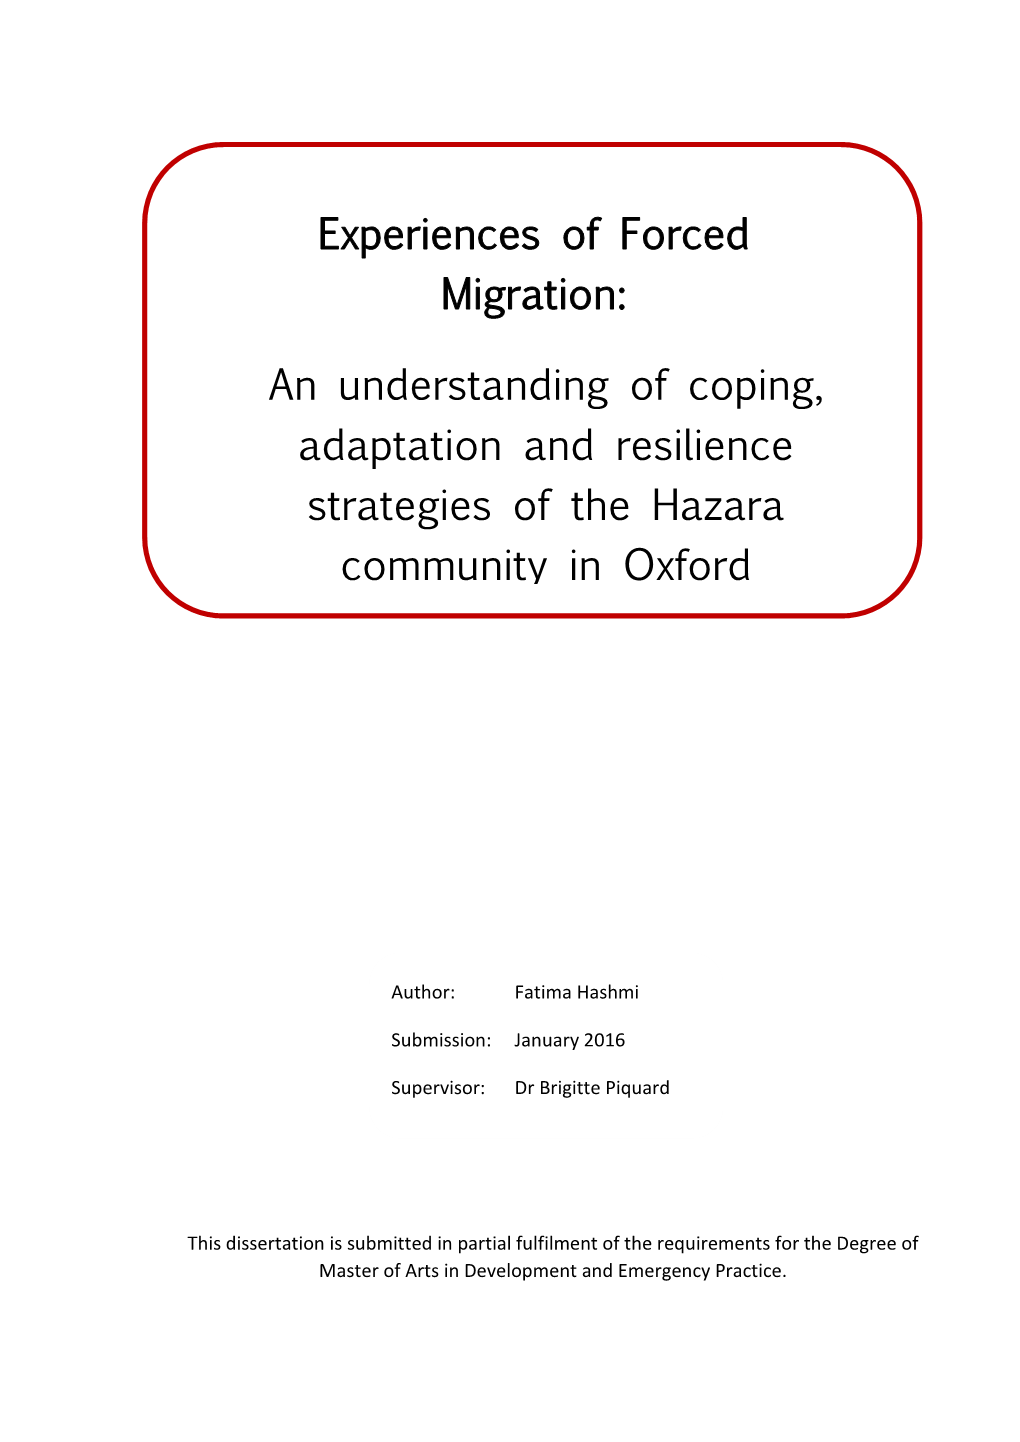 Experiences of Forced Migration: an Understanding of Coping